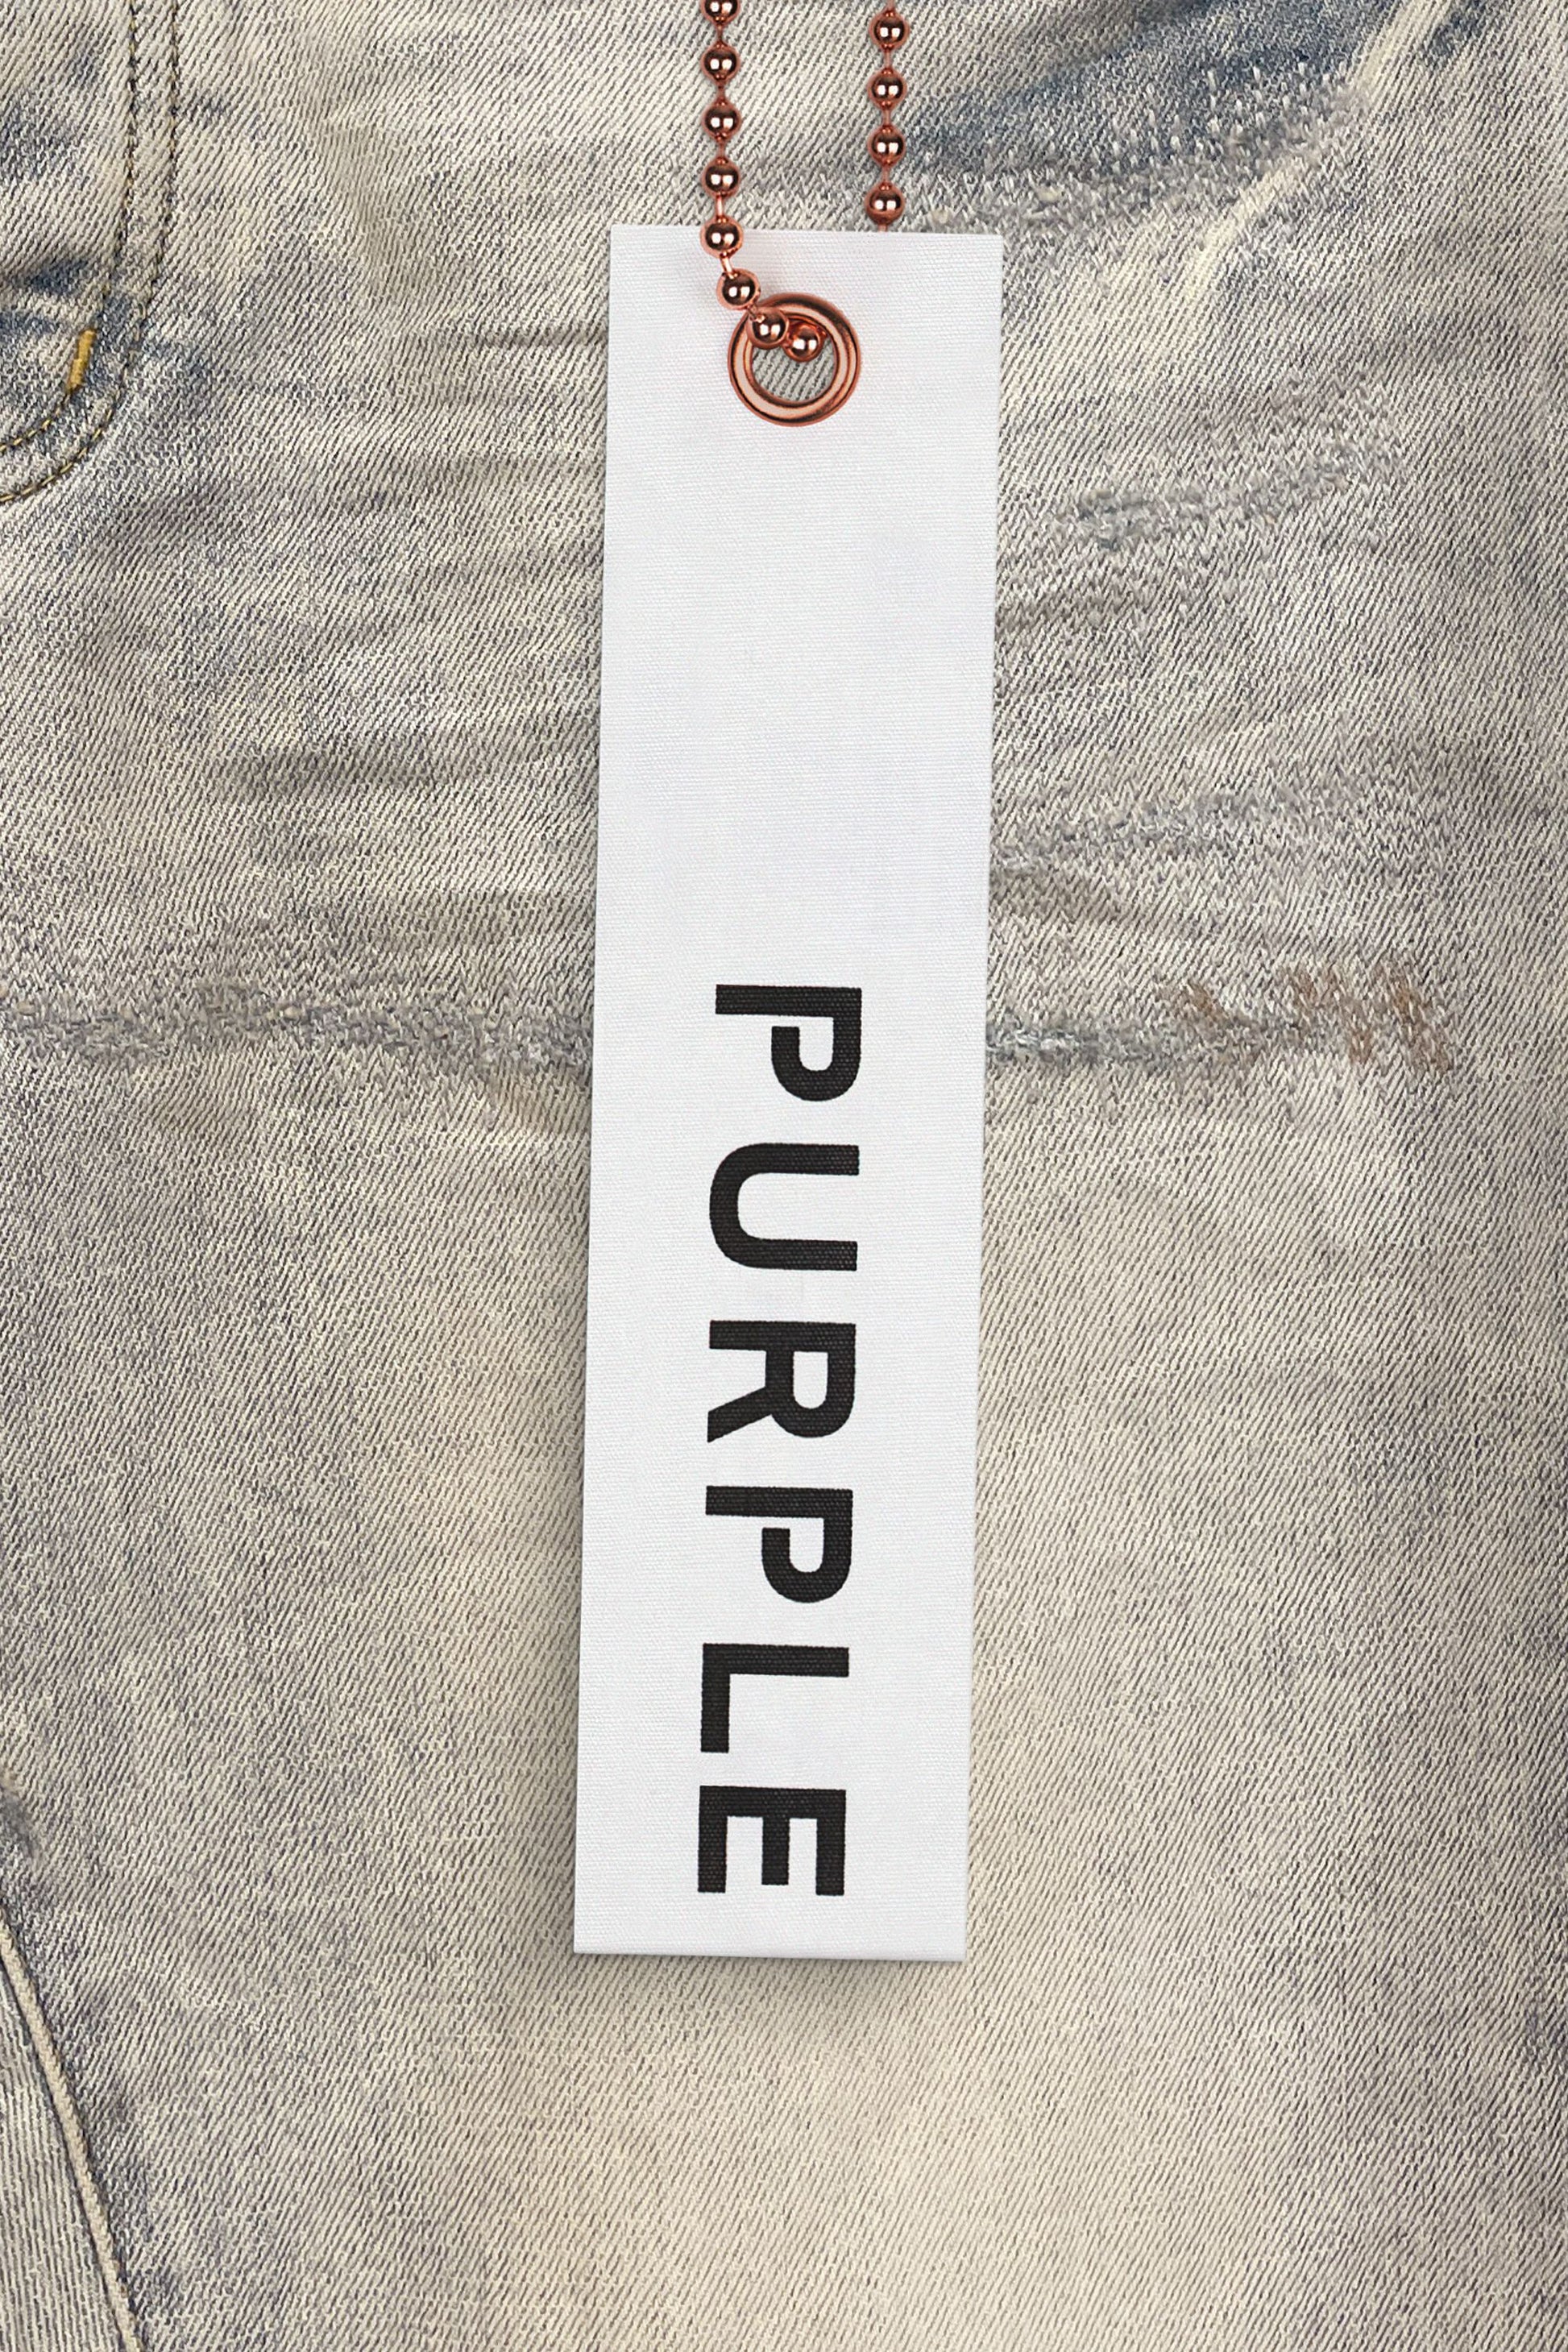 New Purple Brand Jeans Mens Tags with chain included is the tag size 30-40